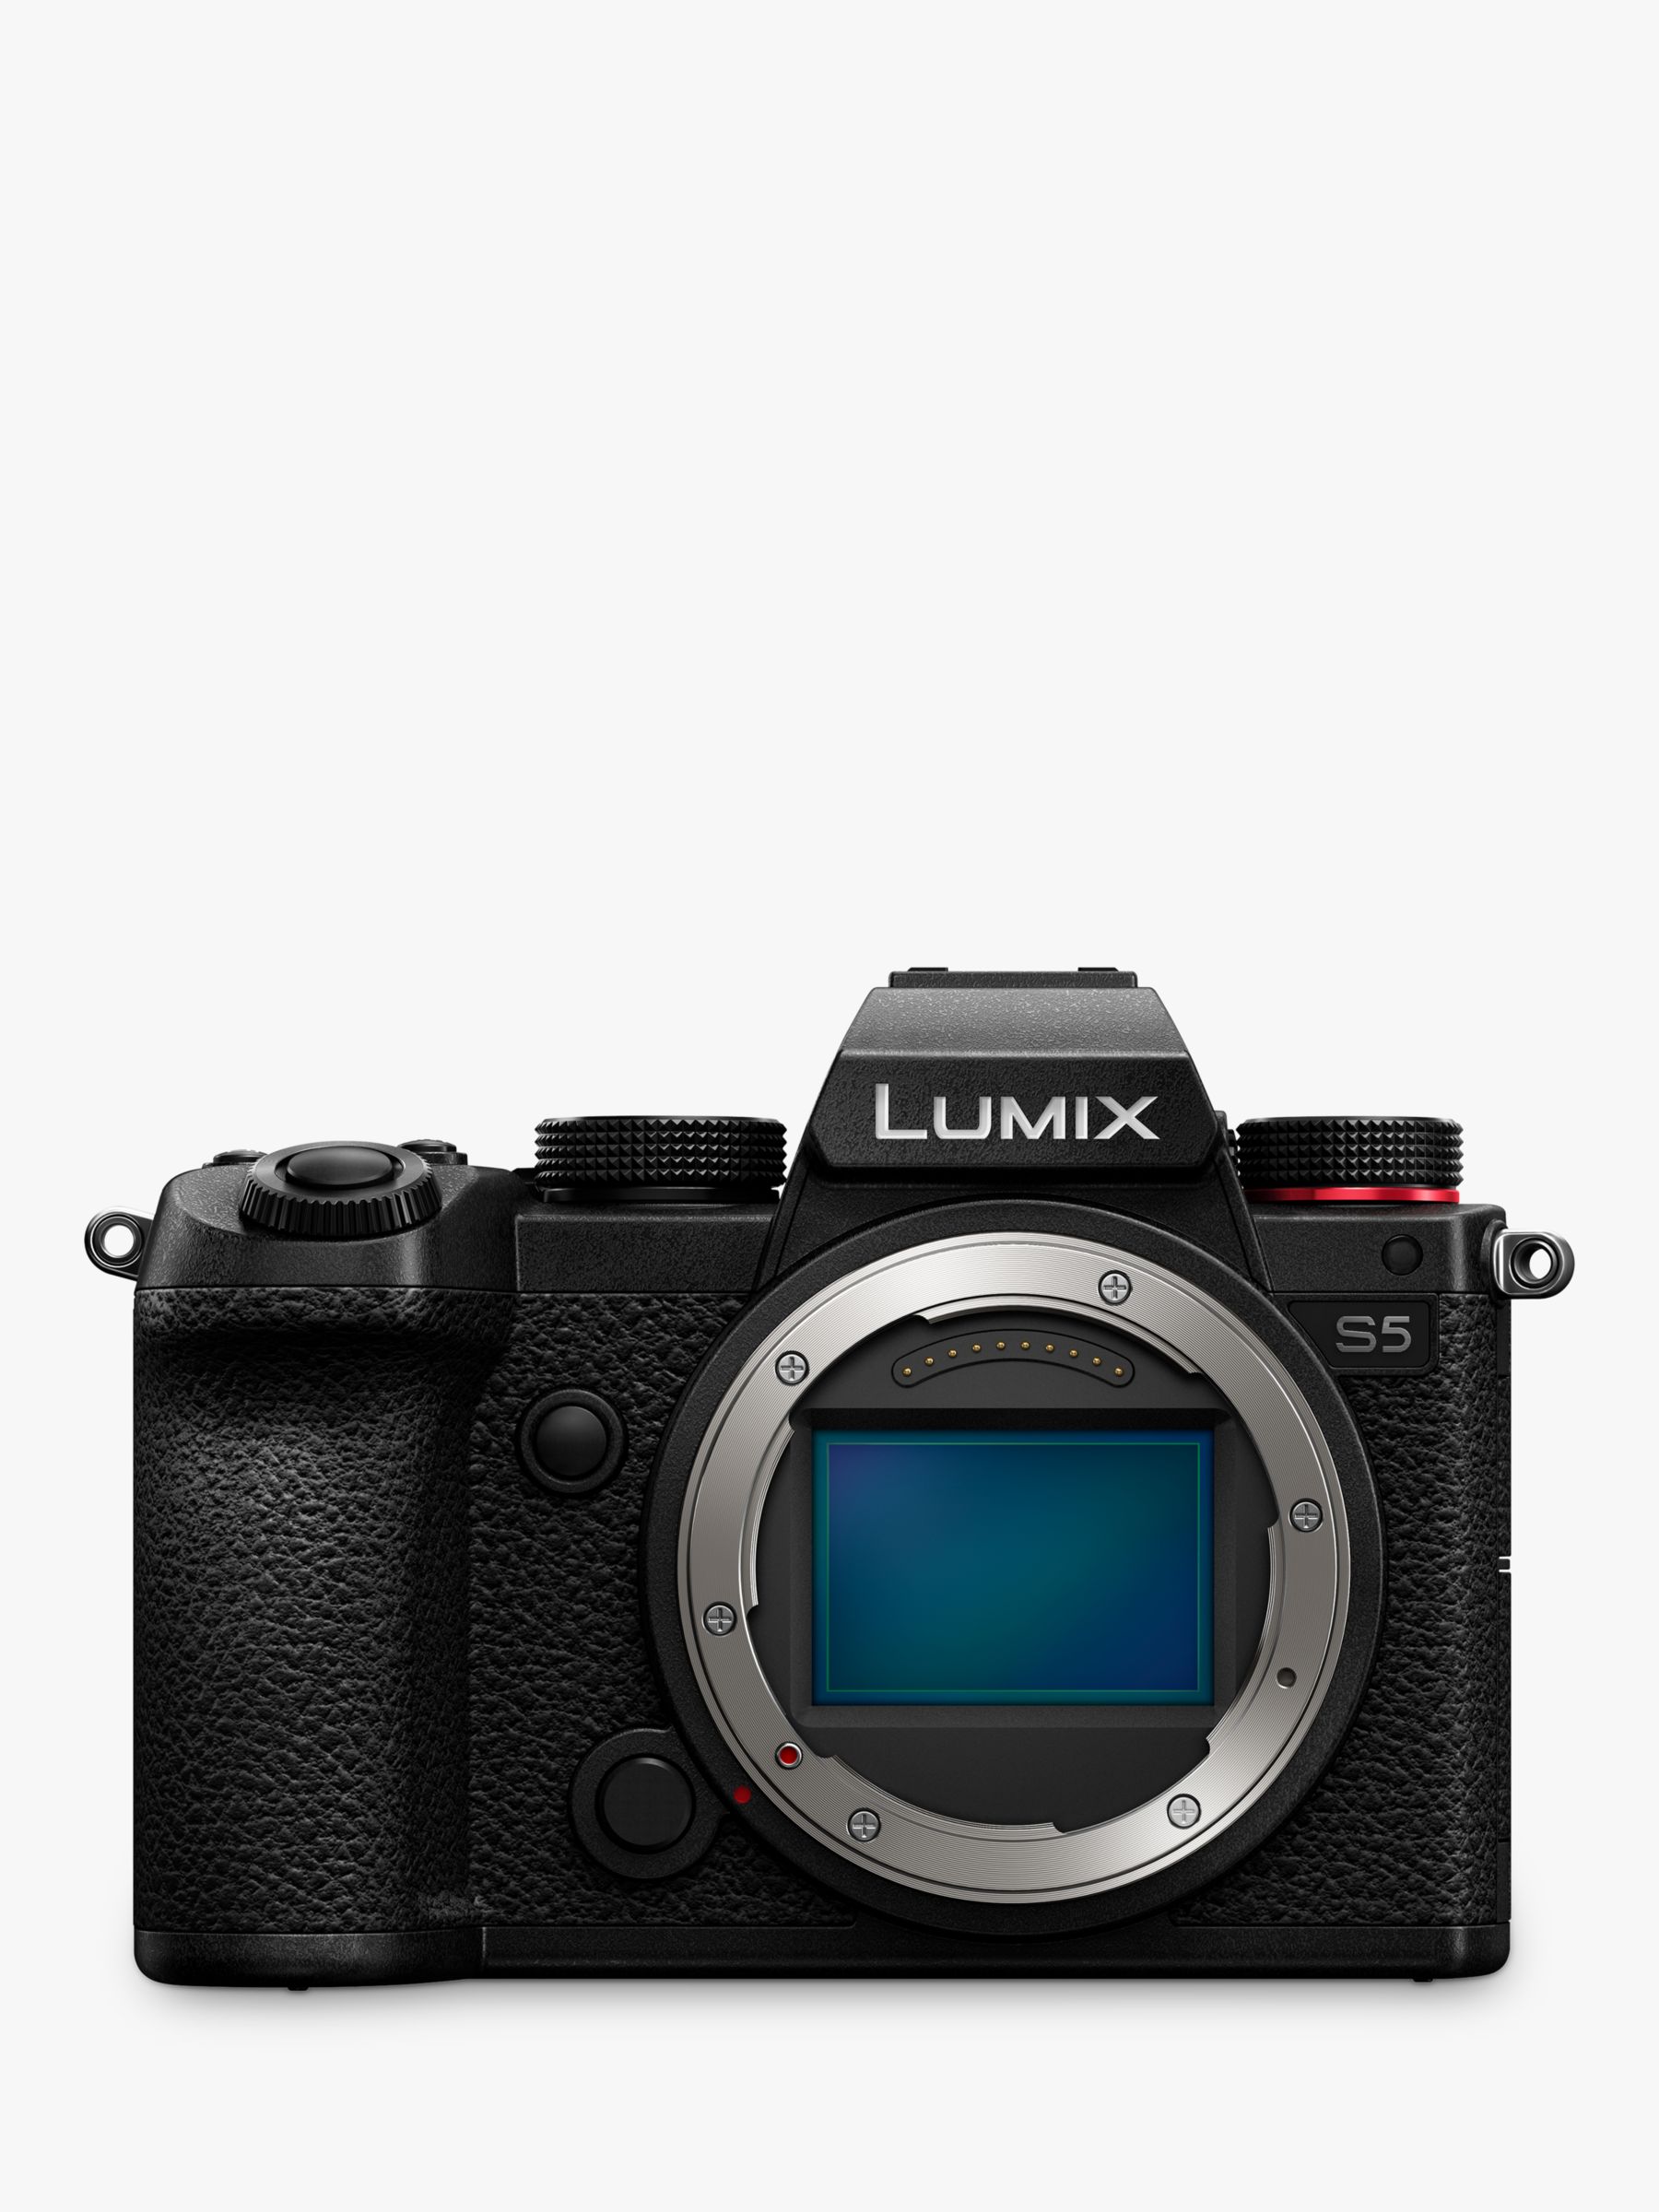 Image of Panasonic Lumix DCS5 Compact System Camera 4K Ultra HD 242MP WiFi Bluetooth Live Viewfinder 3 VariAngle Touch Screen Body Only Black